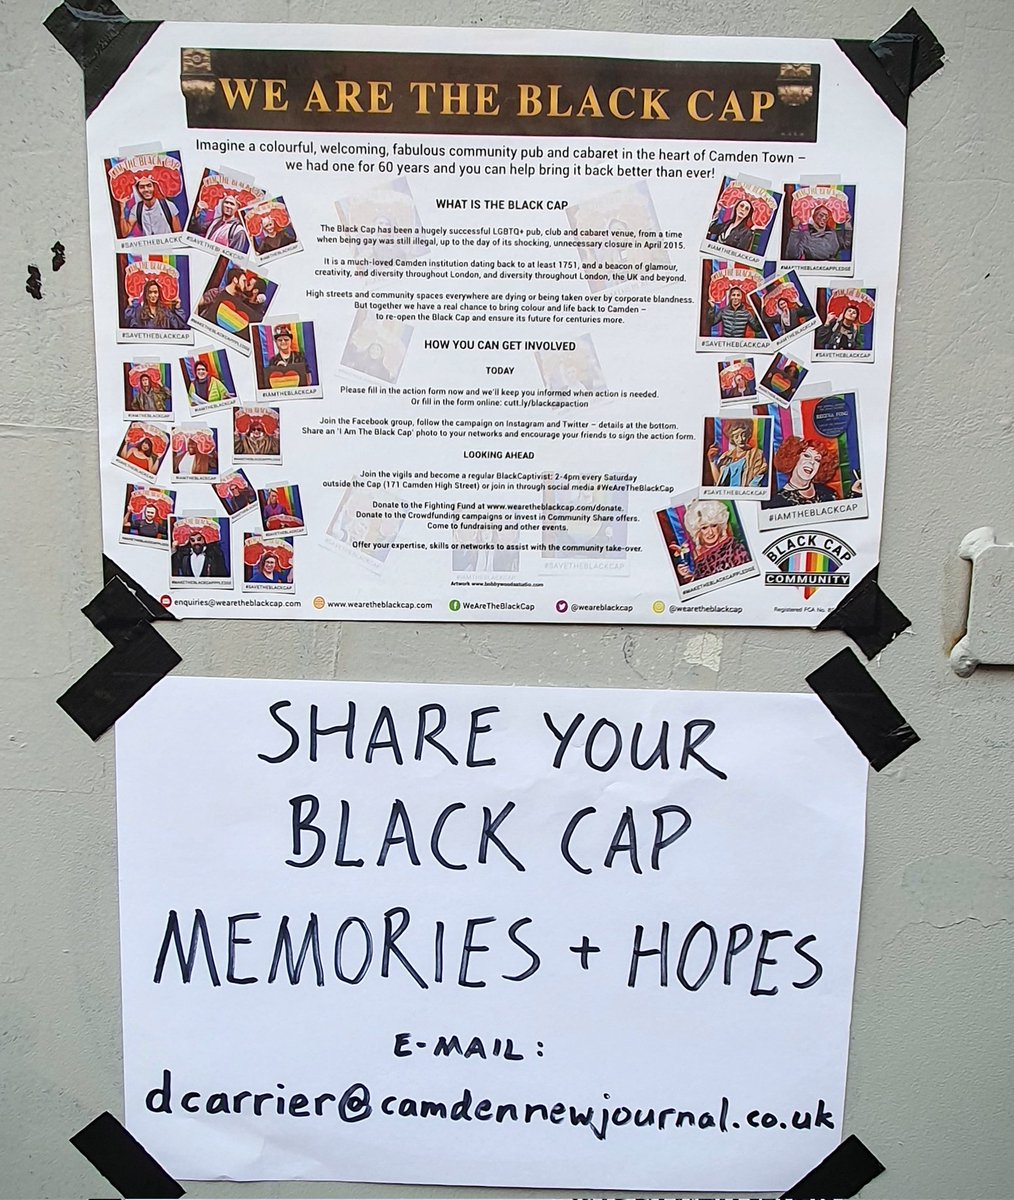 Nine years closed feels like a long time but it's nothing compared to the Black Cap's 270+ year history and its long future! We and the Camden New Journal are recording as many memories and hopes of the Black Cap as we can. E-mail dcarrier@camdennewjournal.co.uk with yours!